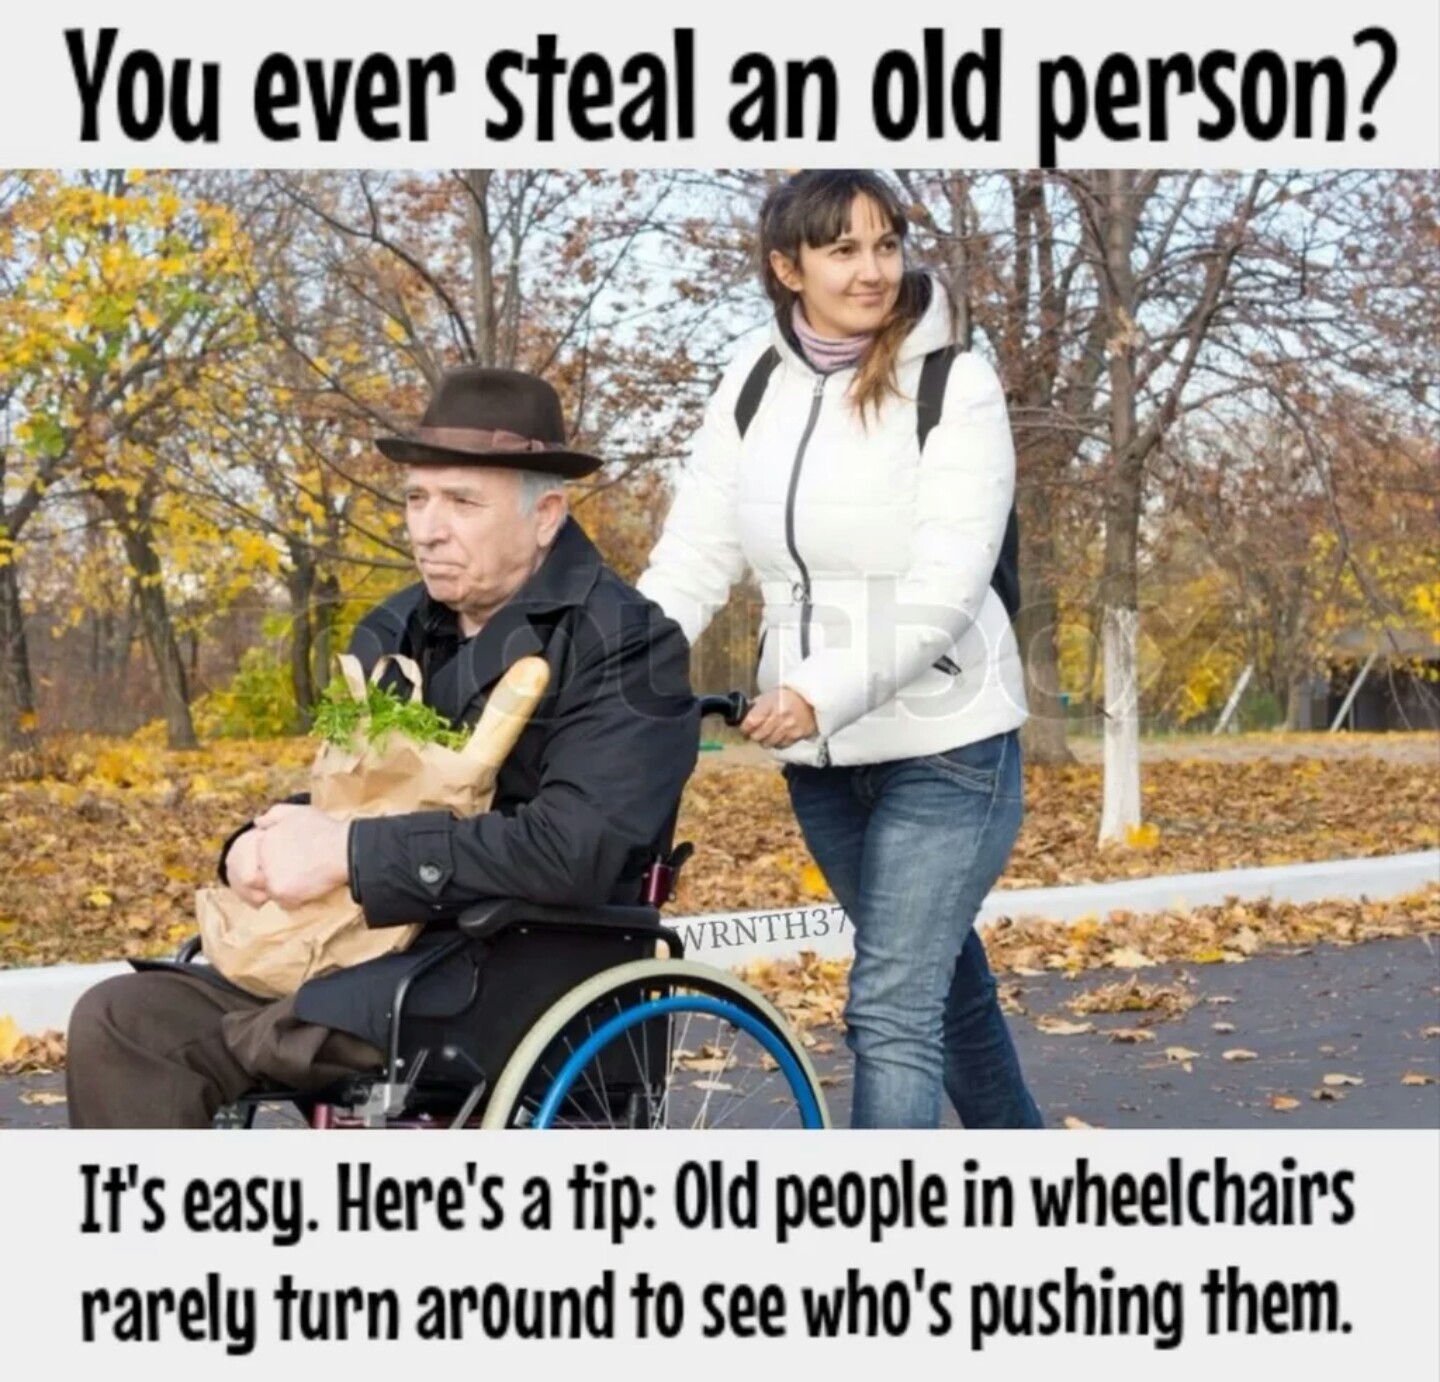 old handicapped - You ever steal an old person? WRNTH37 It's easy. Here's a tip Old people in wheelchairs rarely turn around to see who's pushing them.